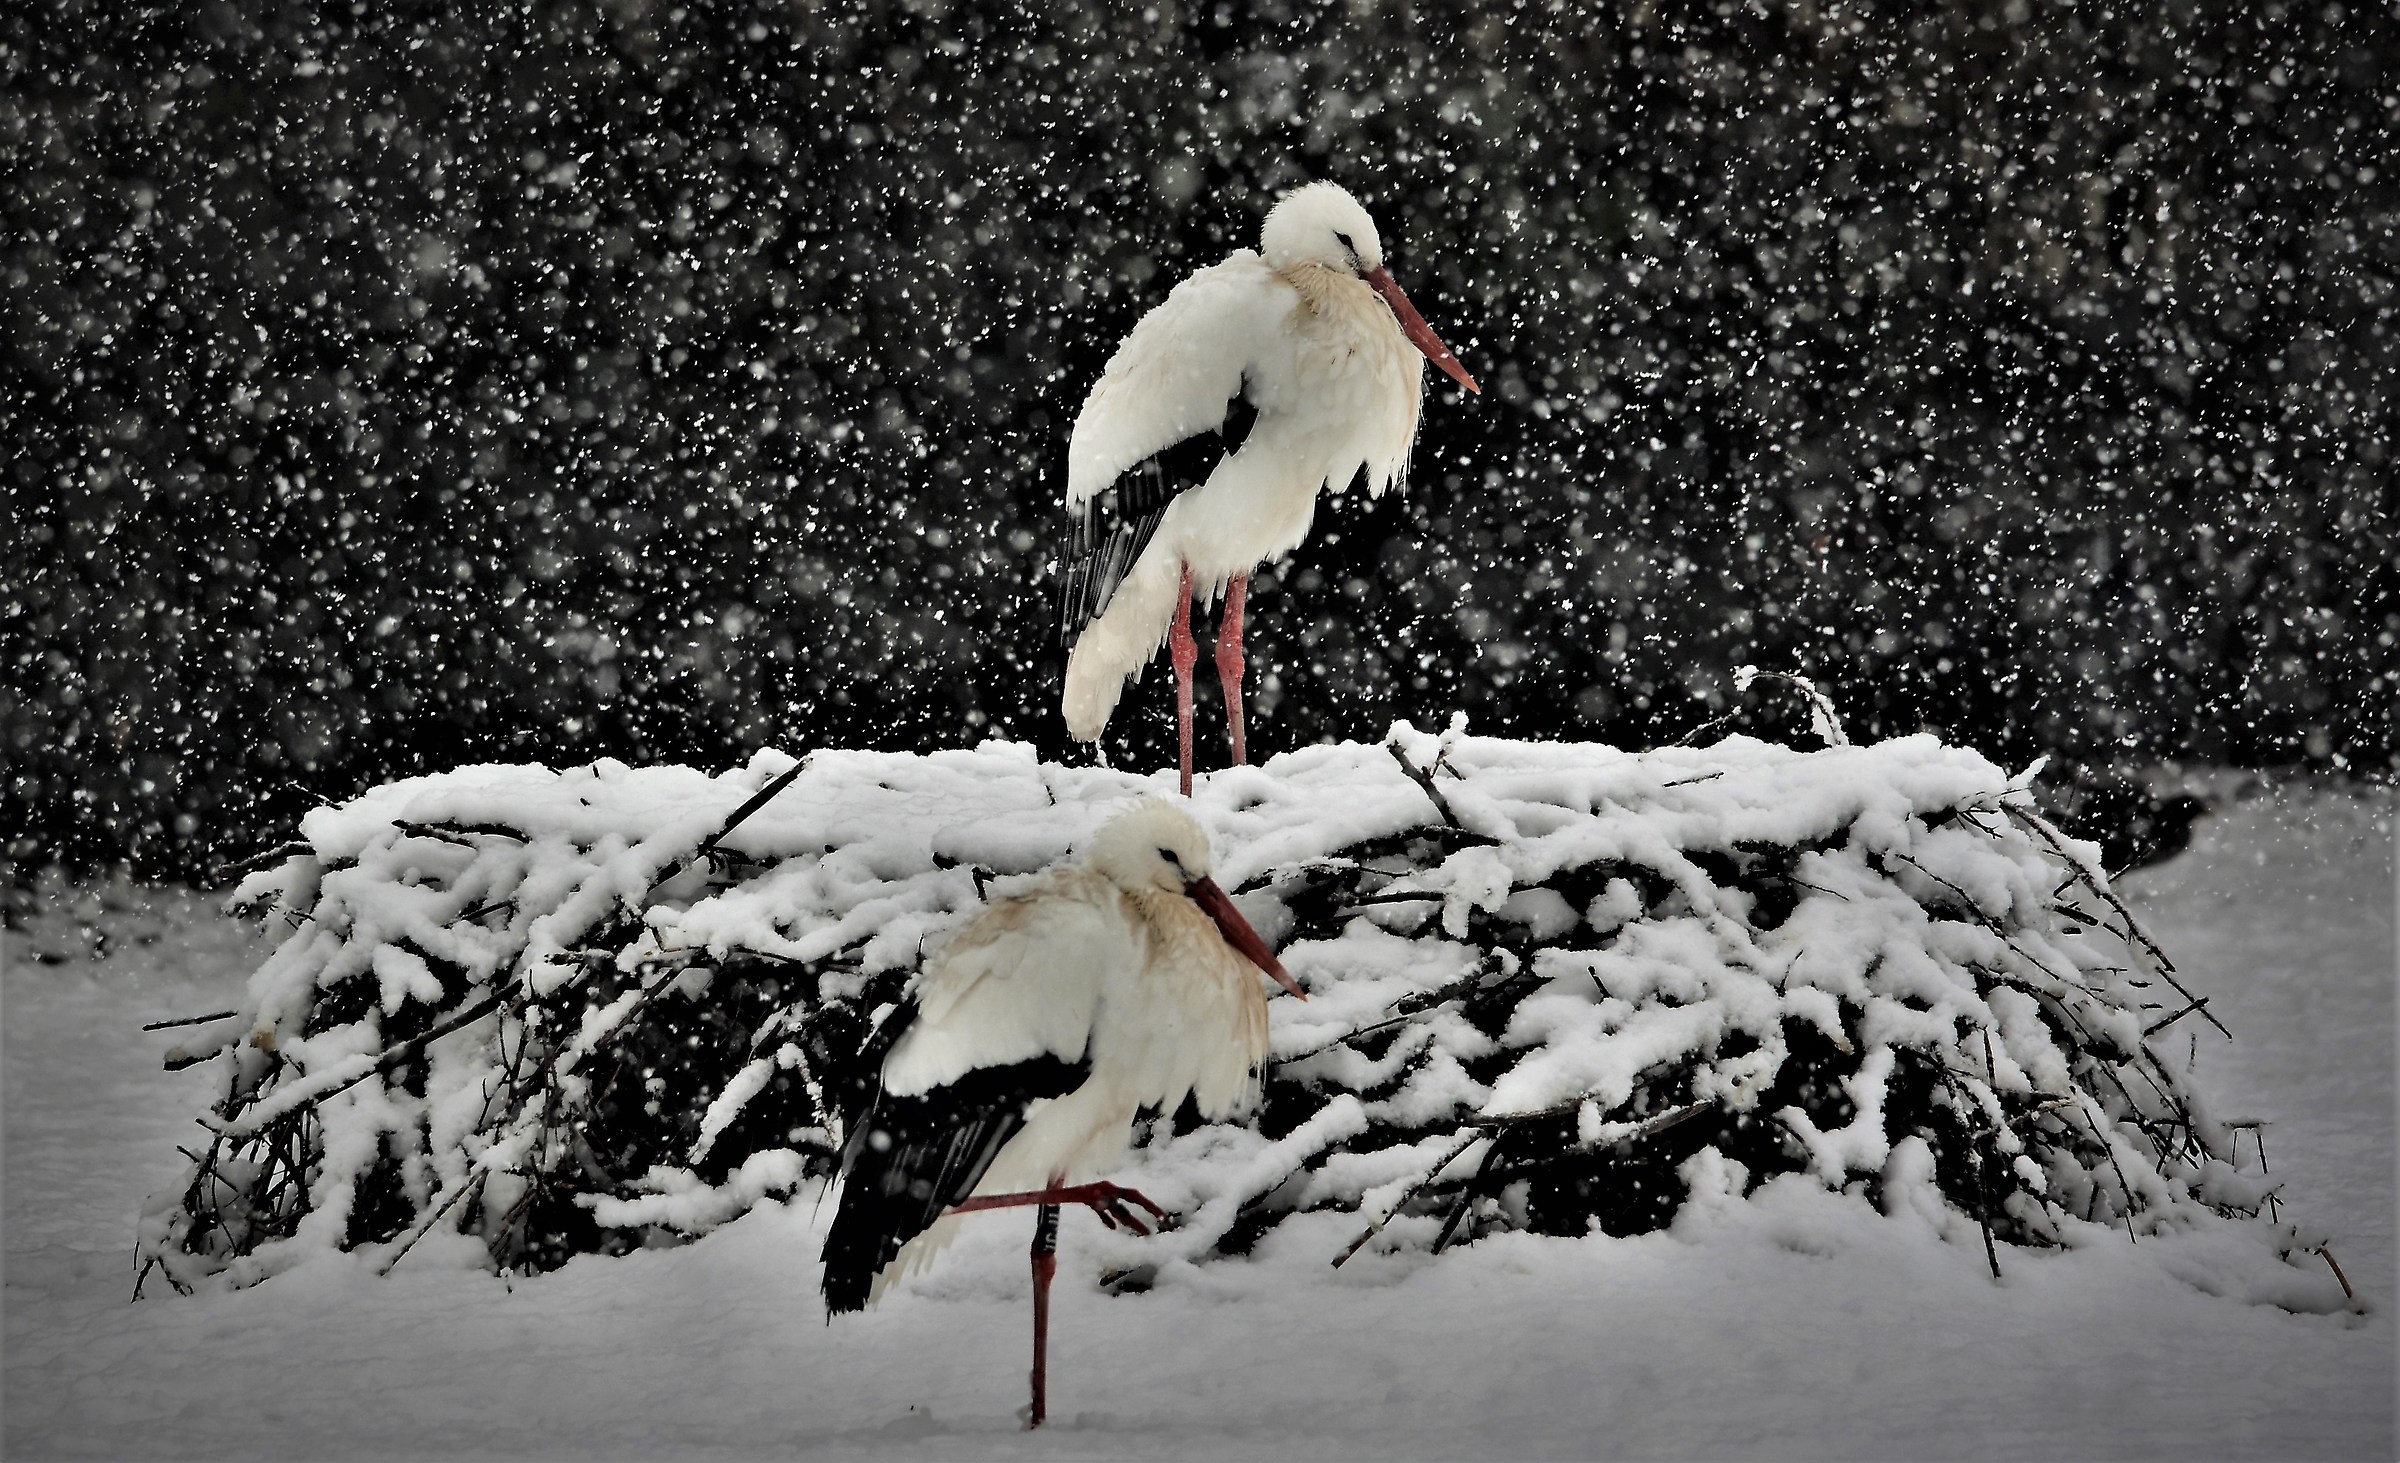 The snowfalls on the storks ...